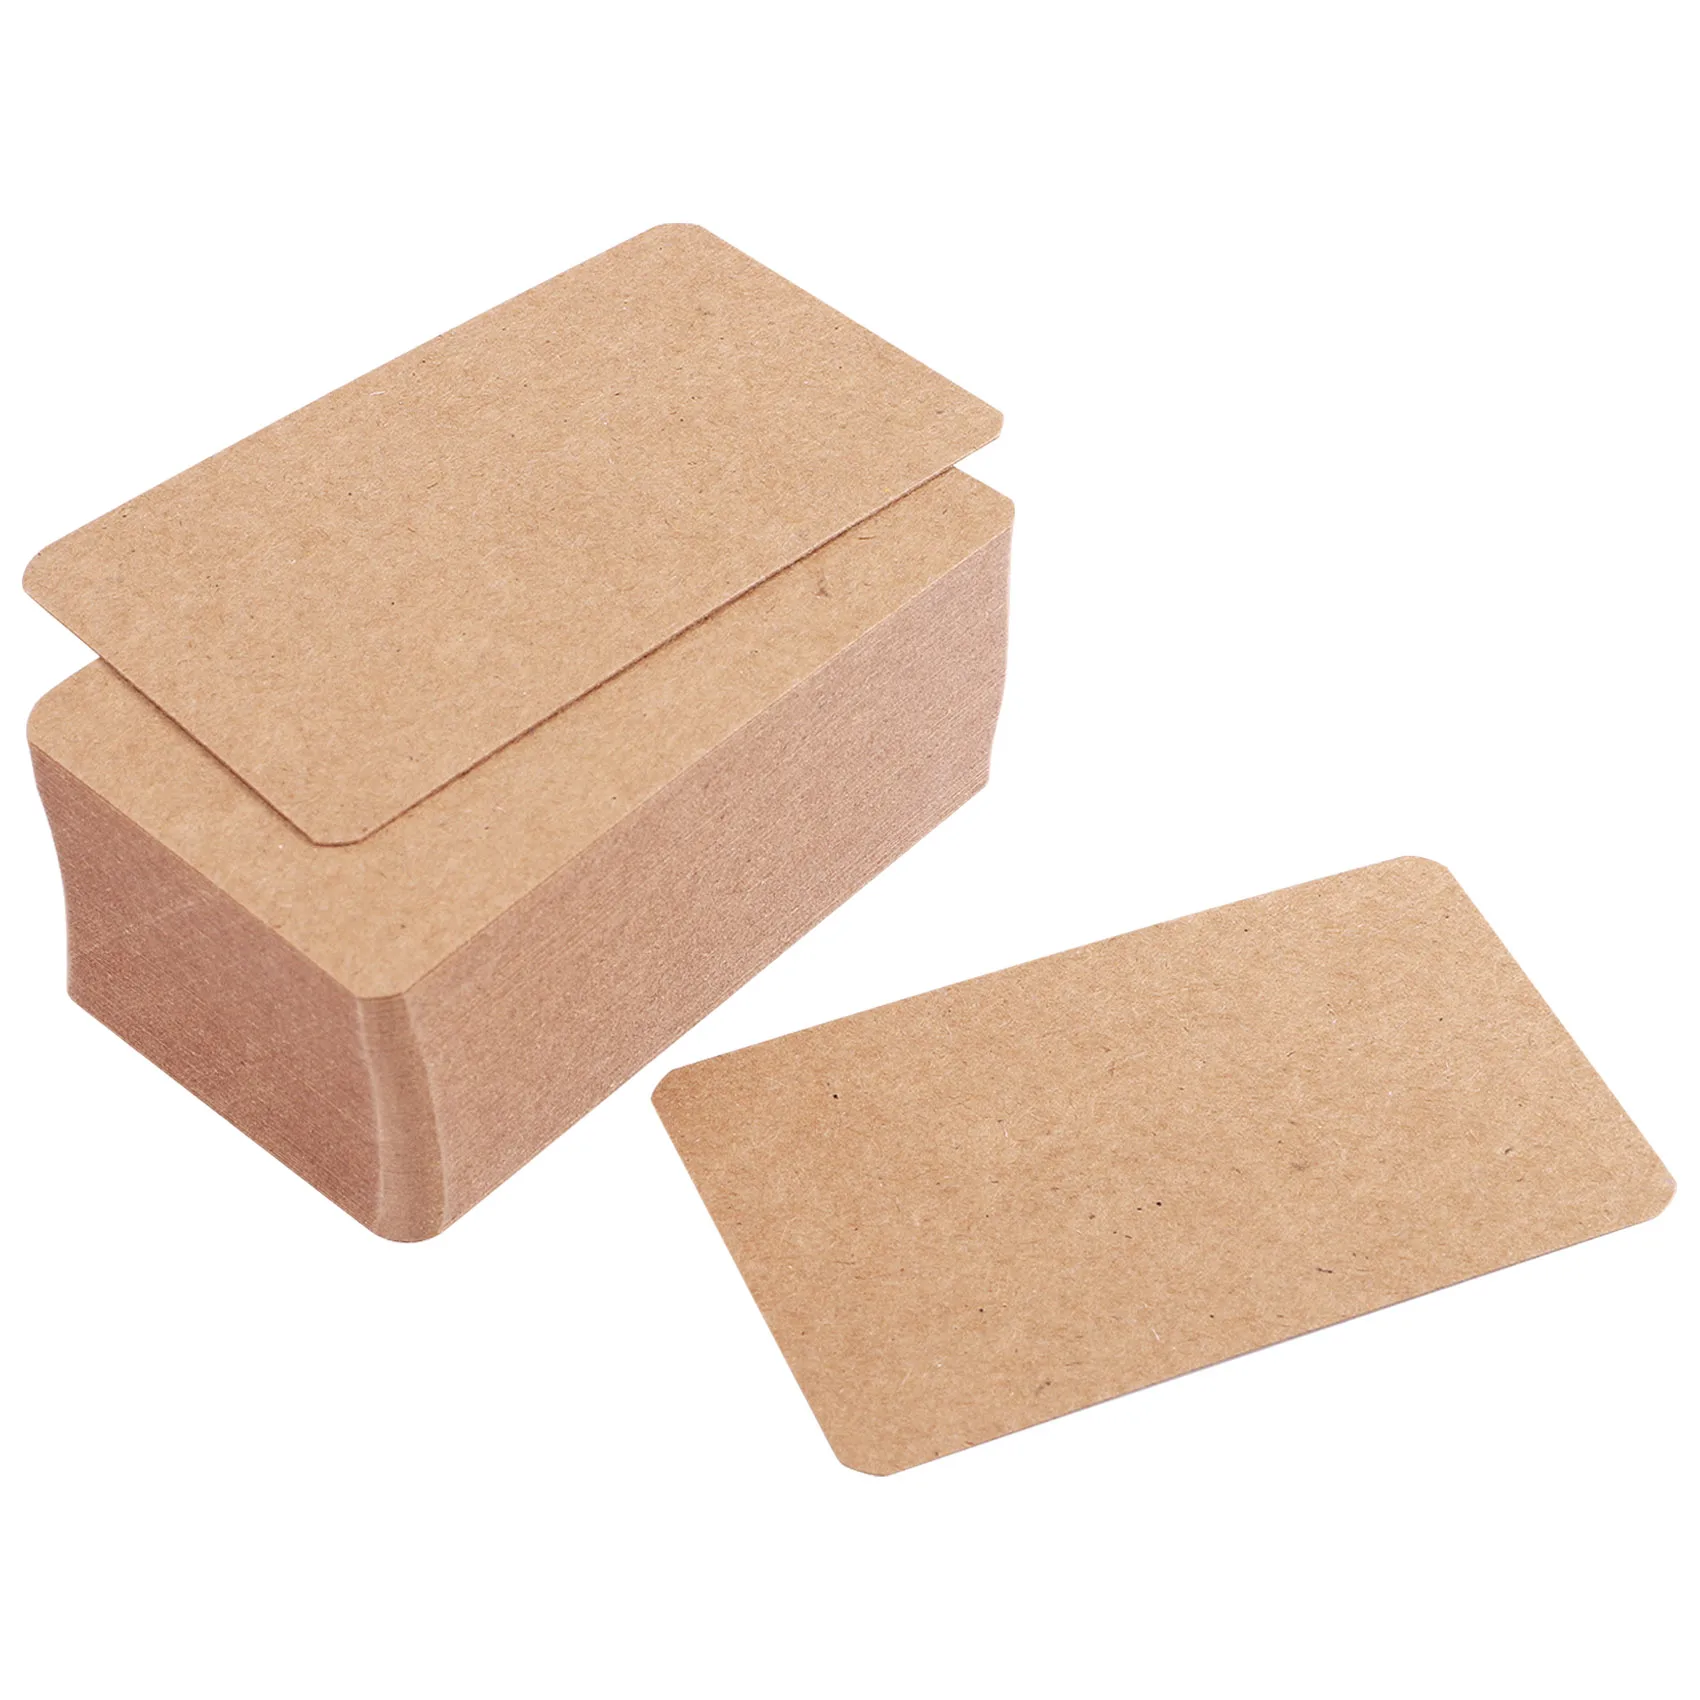 

100pcs Blank Kraft paper Business Cards Word Card Message Card DIY Gift Card